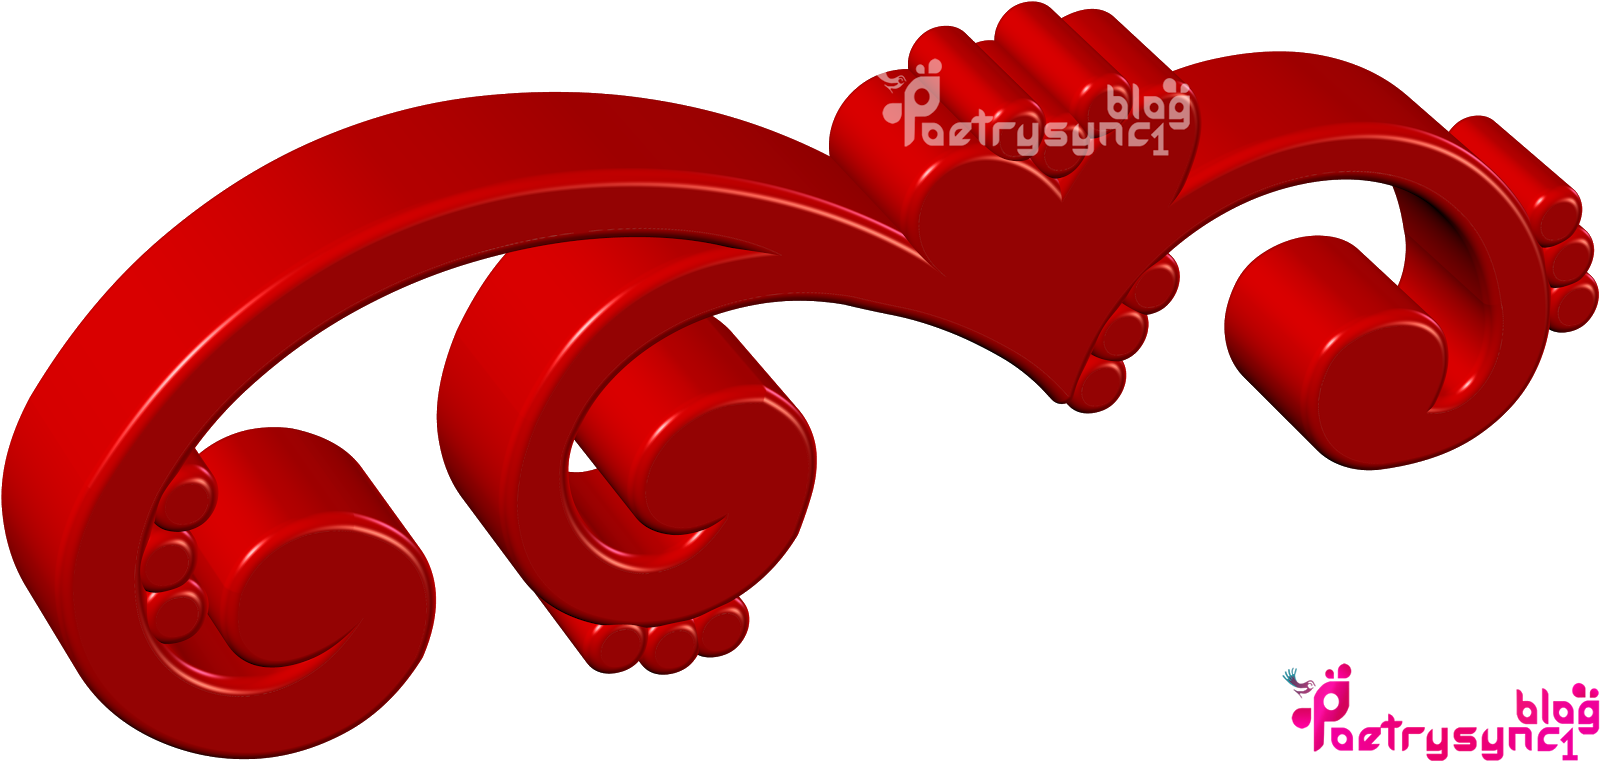 Love 3d Vector In Red Colour By Poetrysync1 - Illustration - HD Wallpaper 